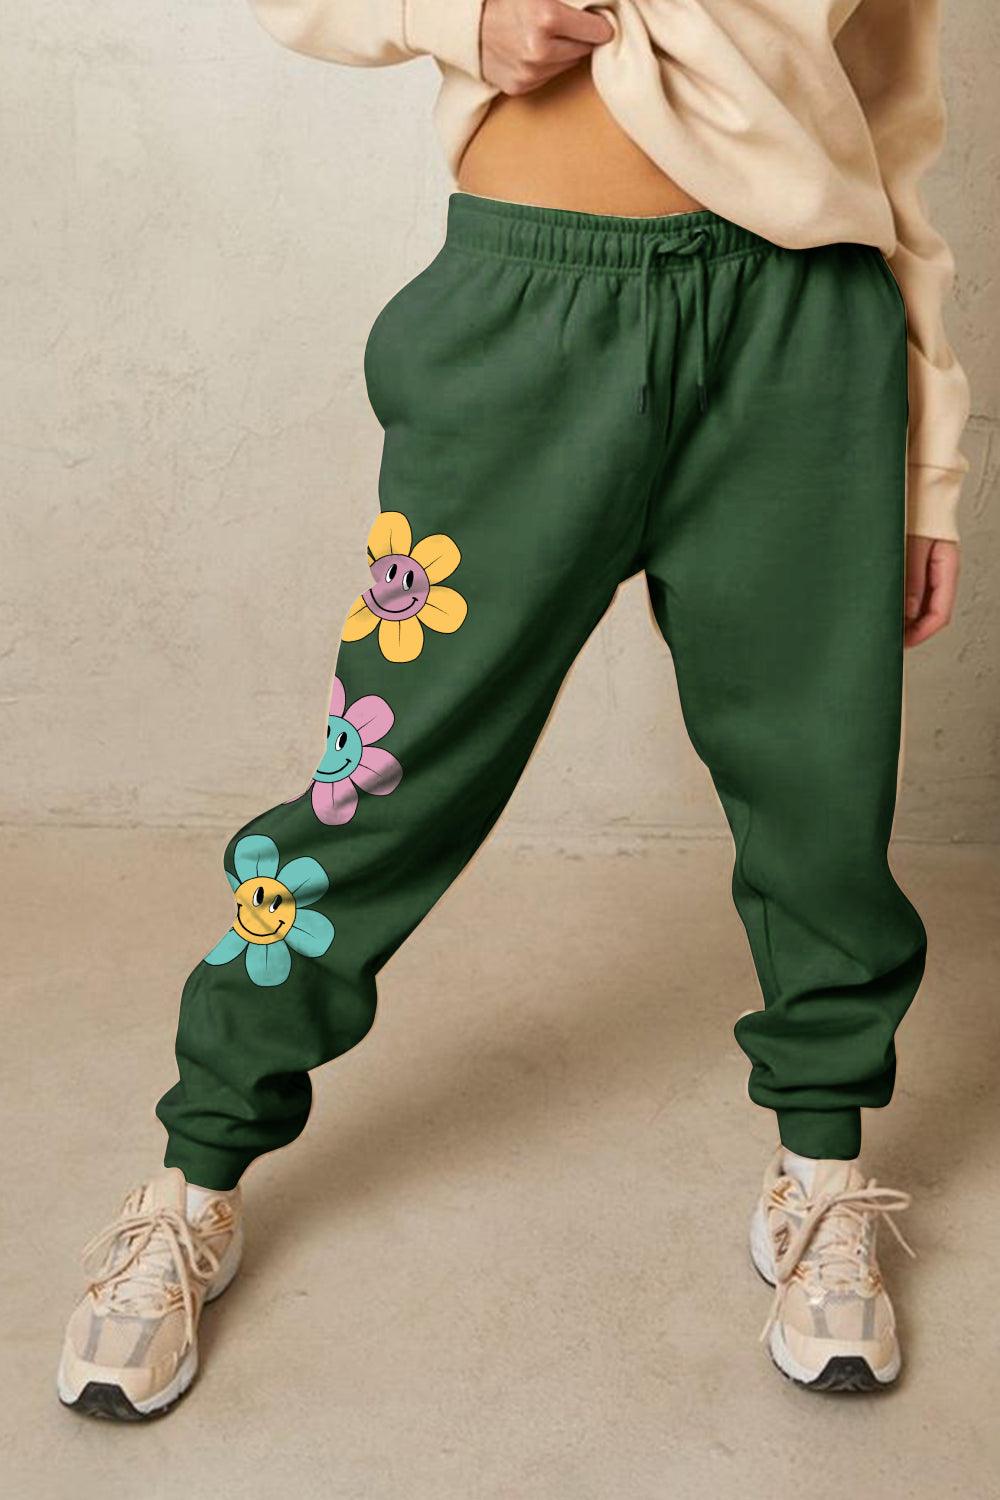 Simply Love Simply Love Full Size Drawstring Flower Graphic Long Sweatpants - Lab Fashion, Home & Health